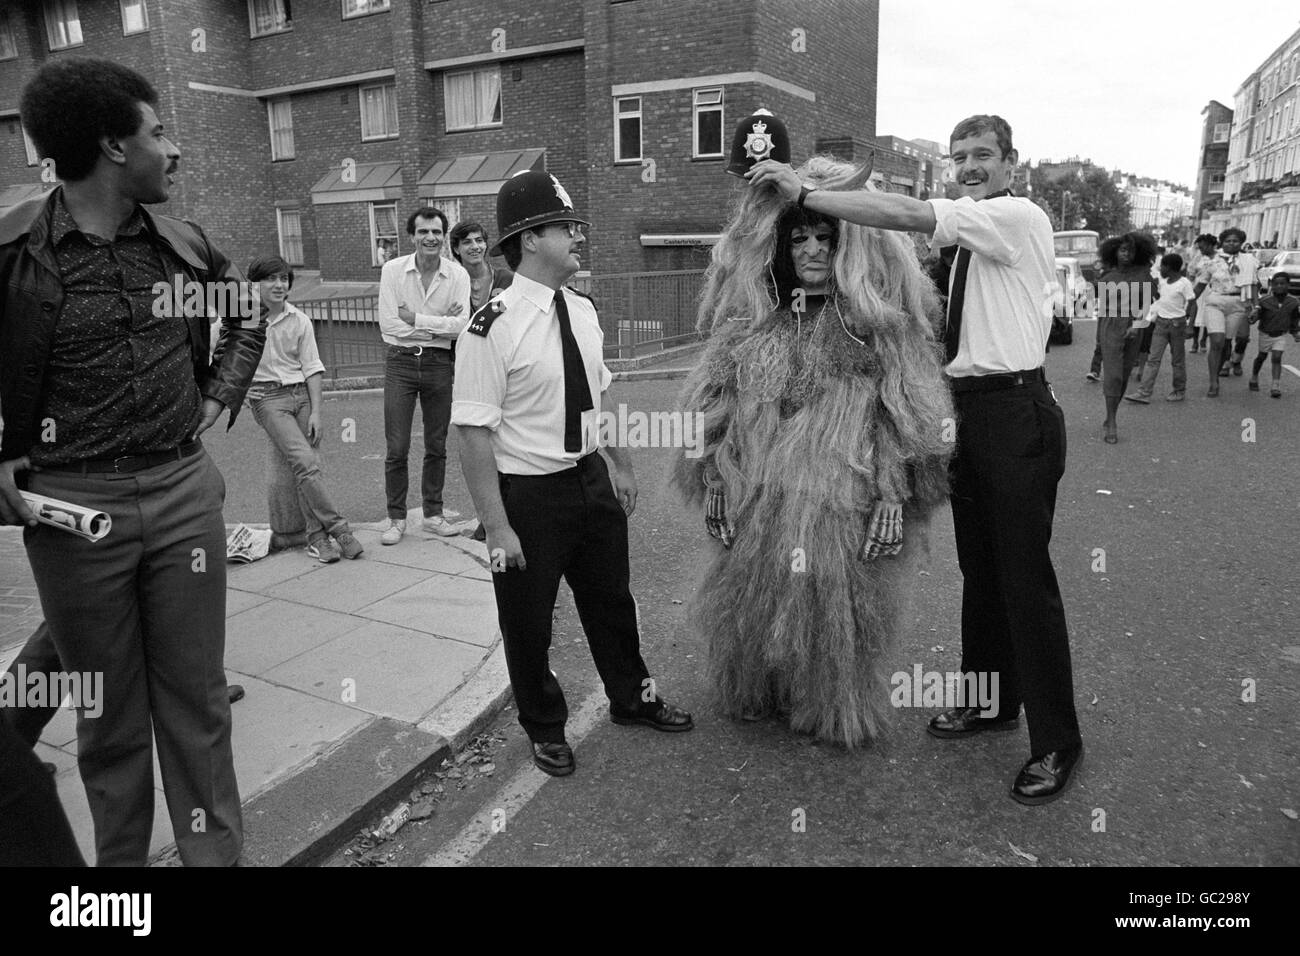 A Notting Hill Carnival witch doctor gets magical aid in the form of a policeman's helmet during peaceful festivities. Stock Photo